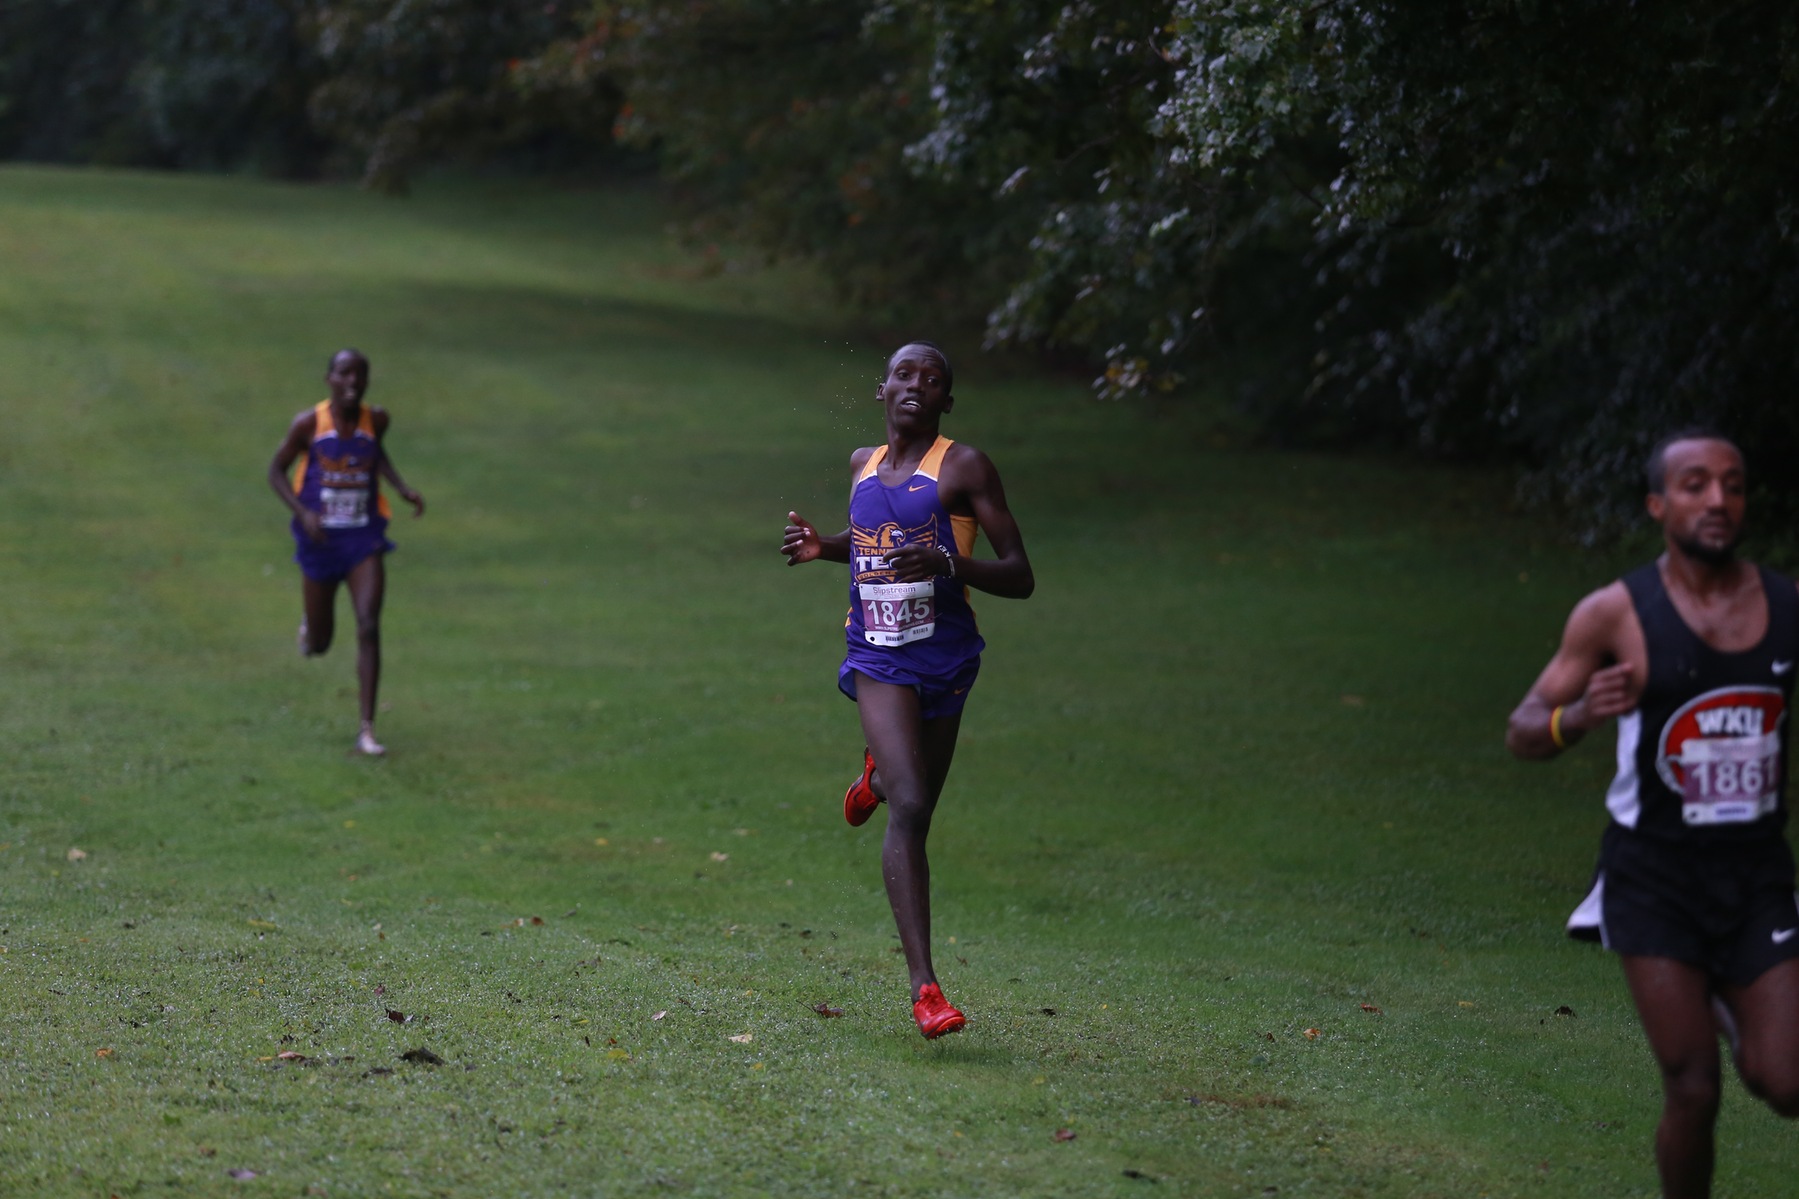 Tech men's cross country returns to action at Florida's Mountain Dew Invitational